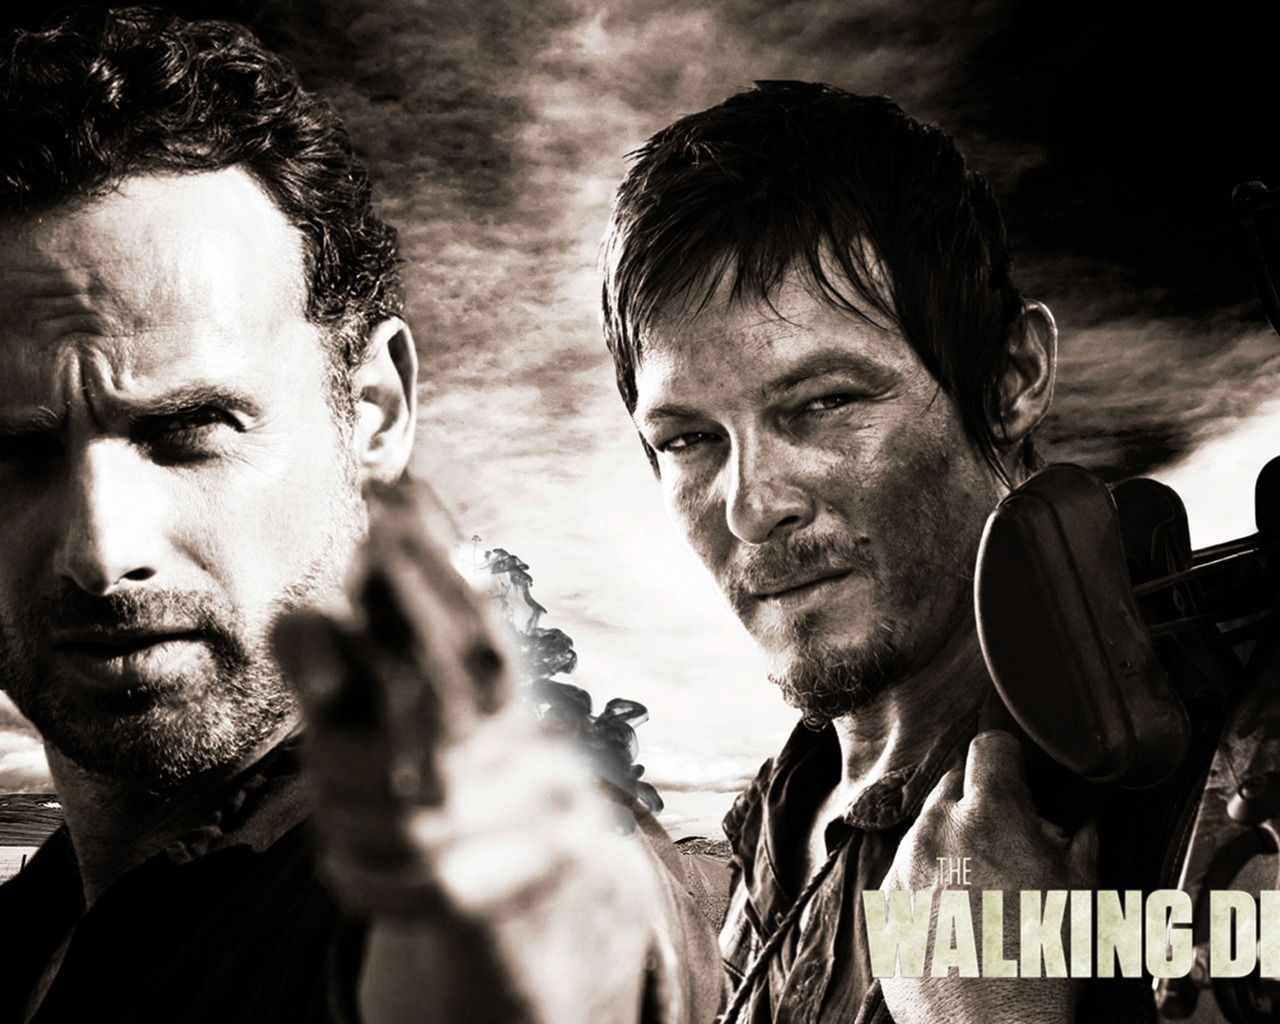 Rick and Daryl The Walking Dead for 1280 x 1024 resolution